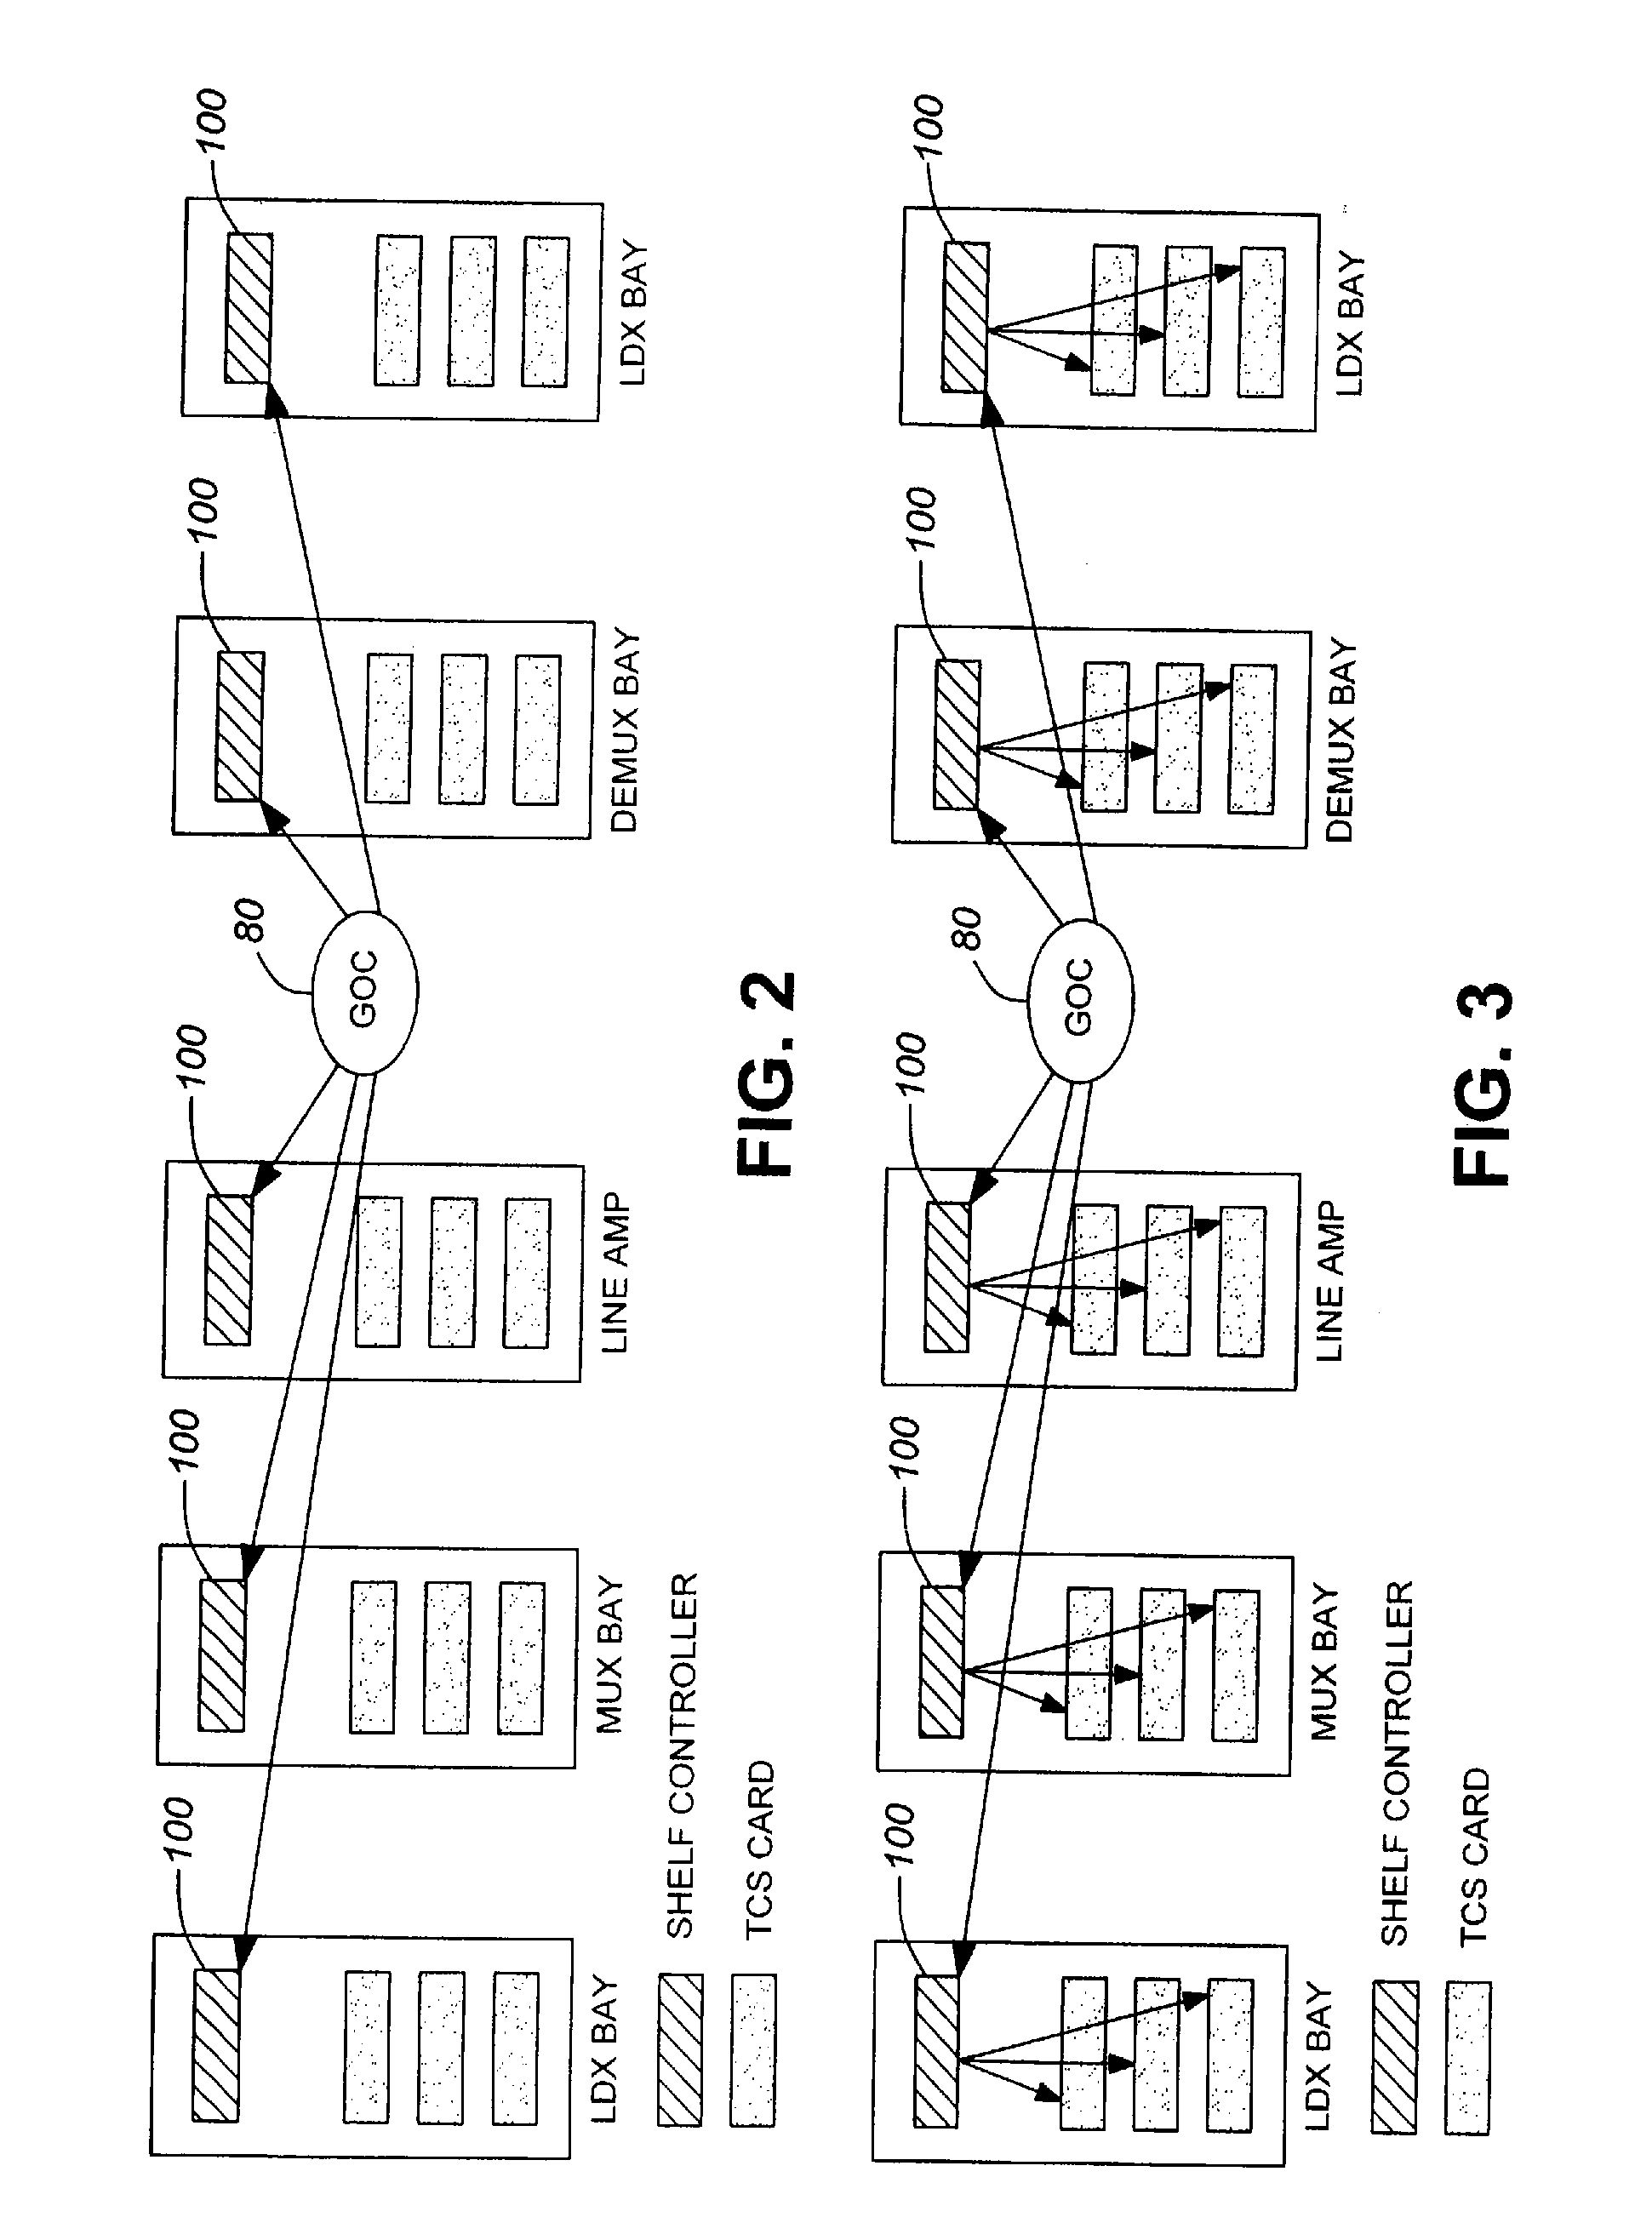 Control of parameters in a global optical controller